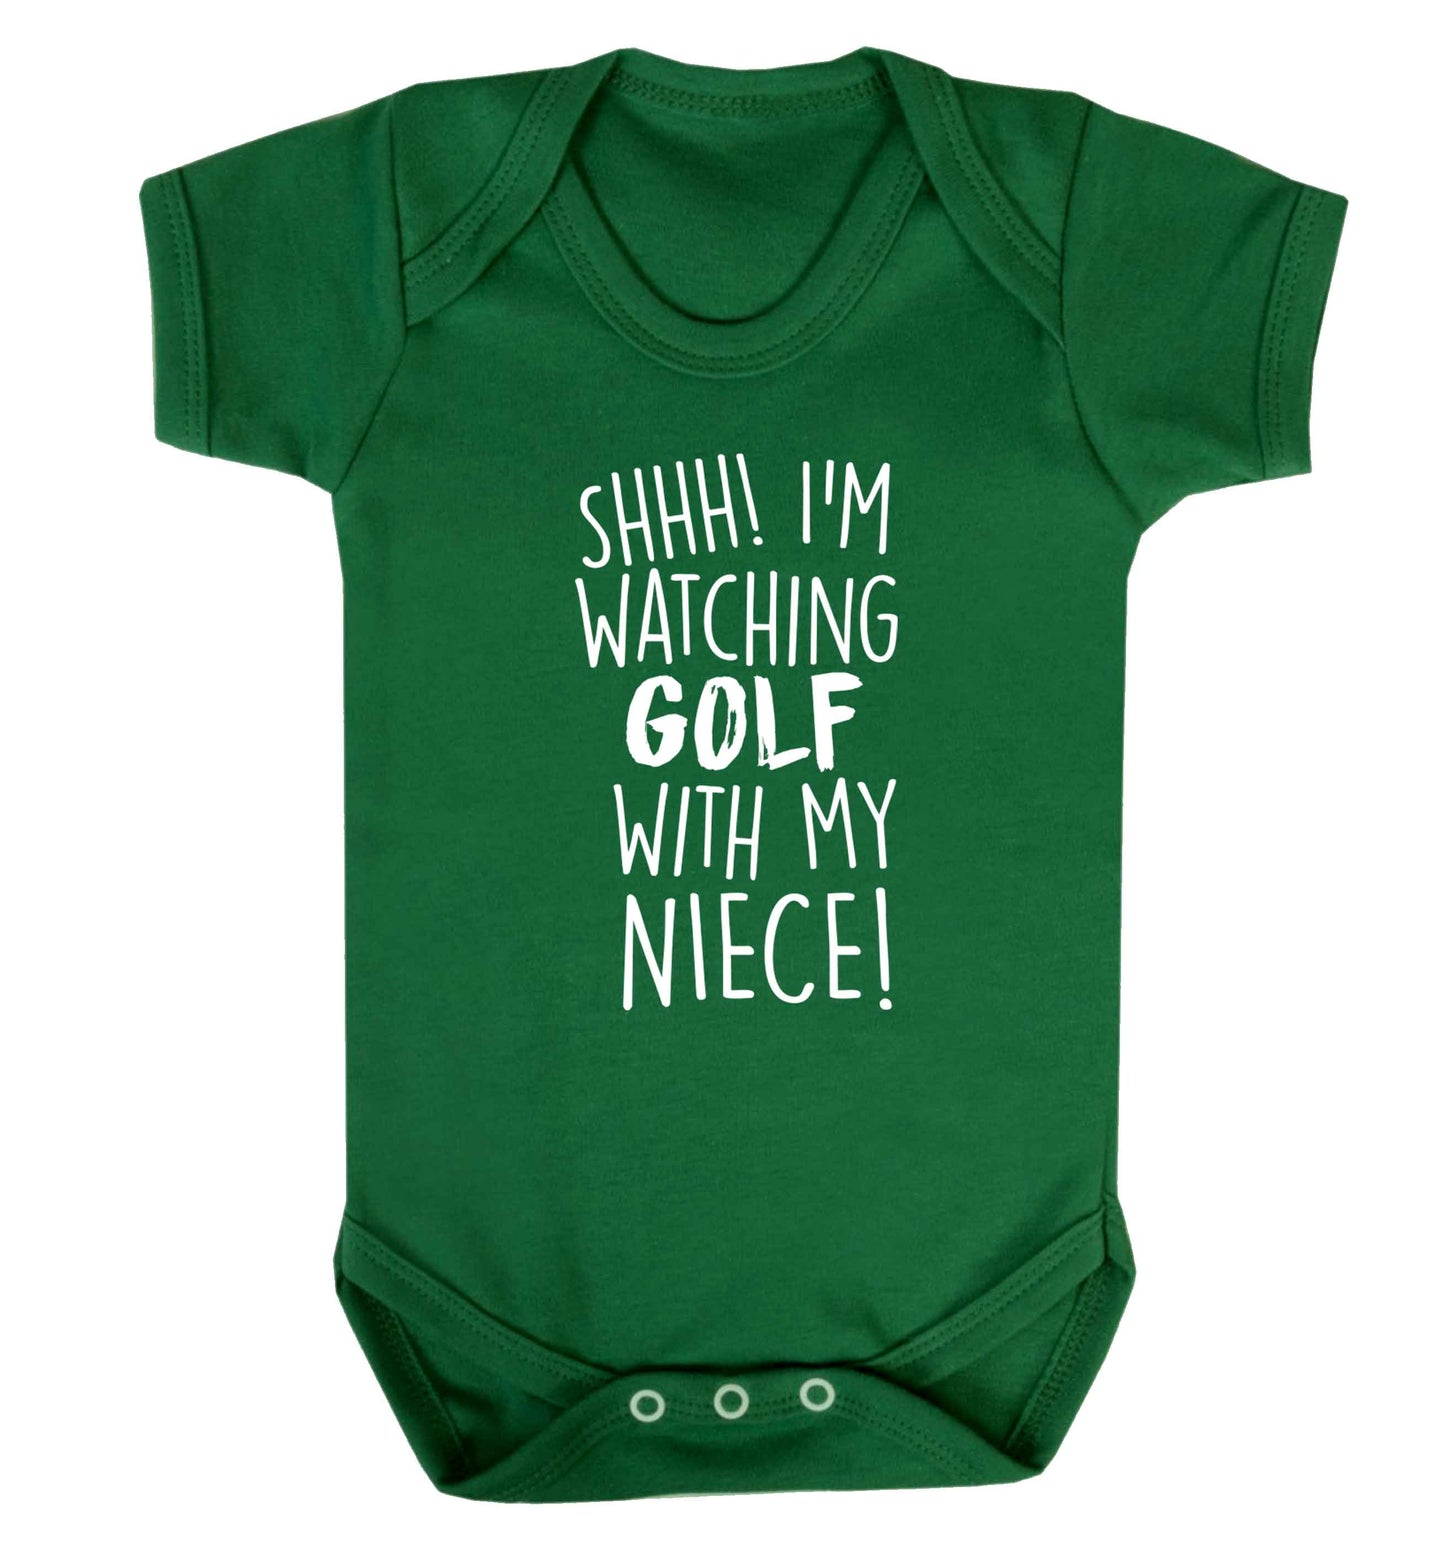 Shh I'm watching golf with my niece Baby Vest green 18-24 months